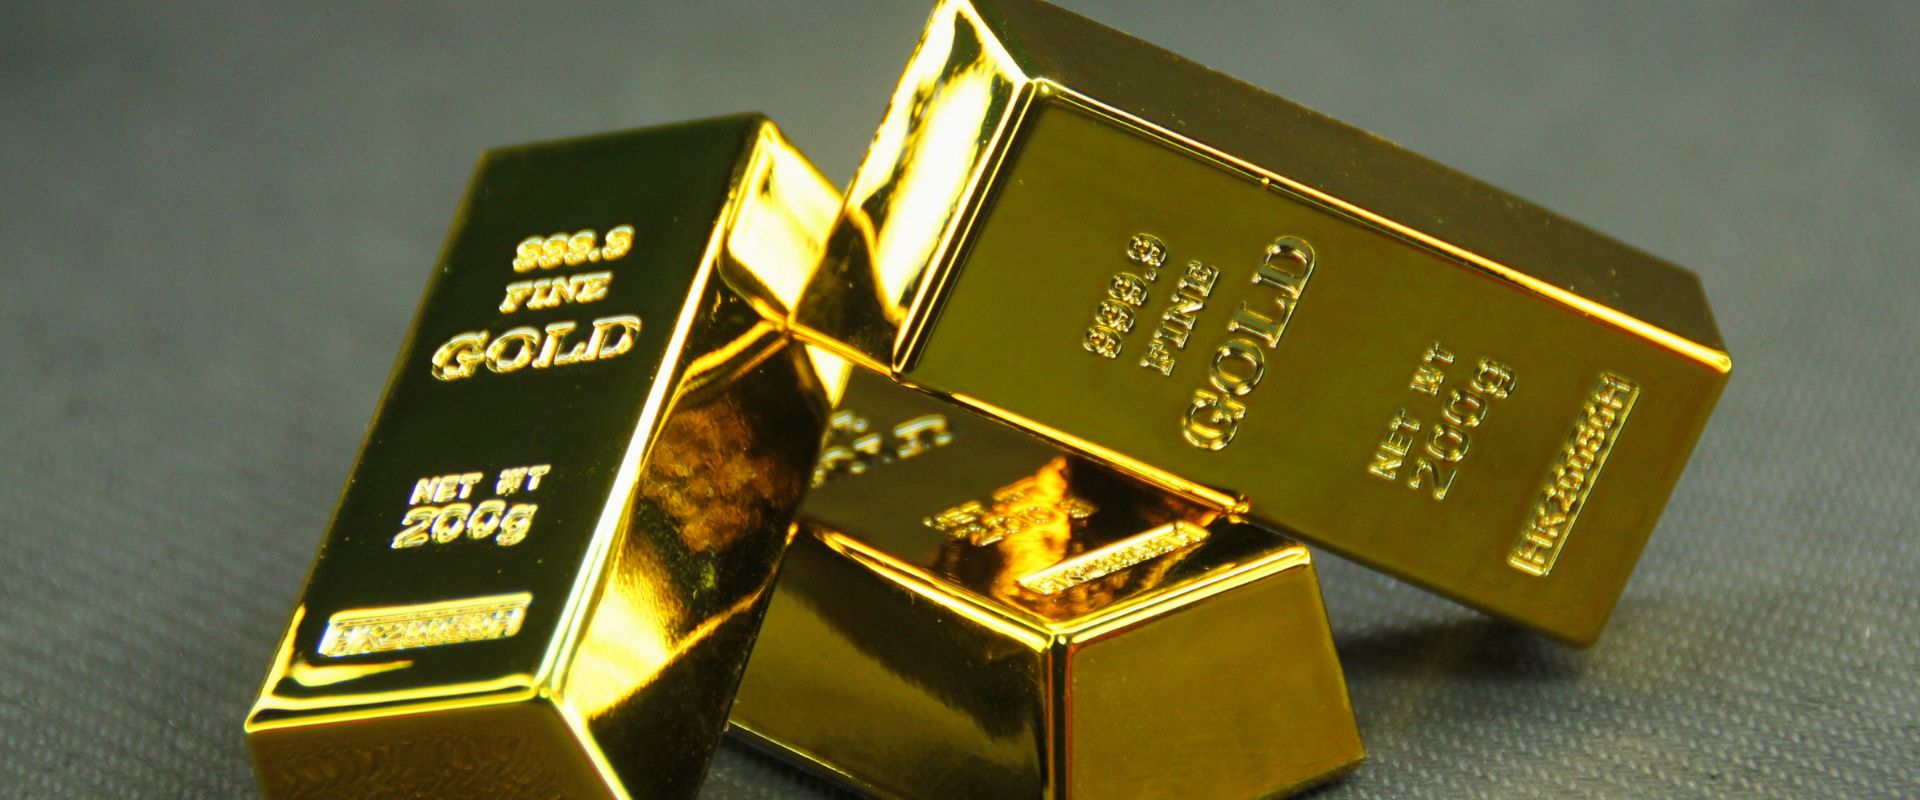 gold bars weighing two hundred grams per piece